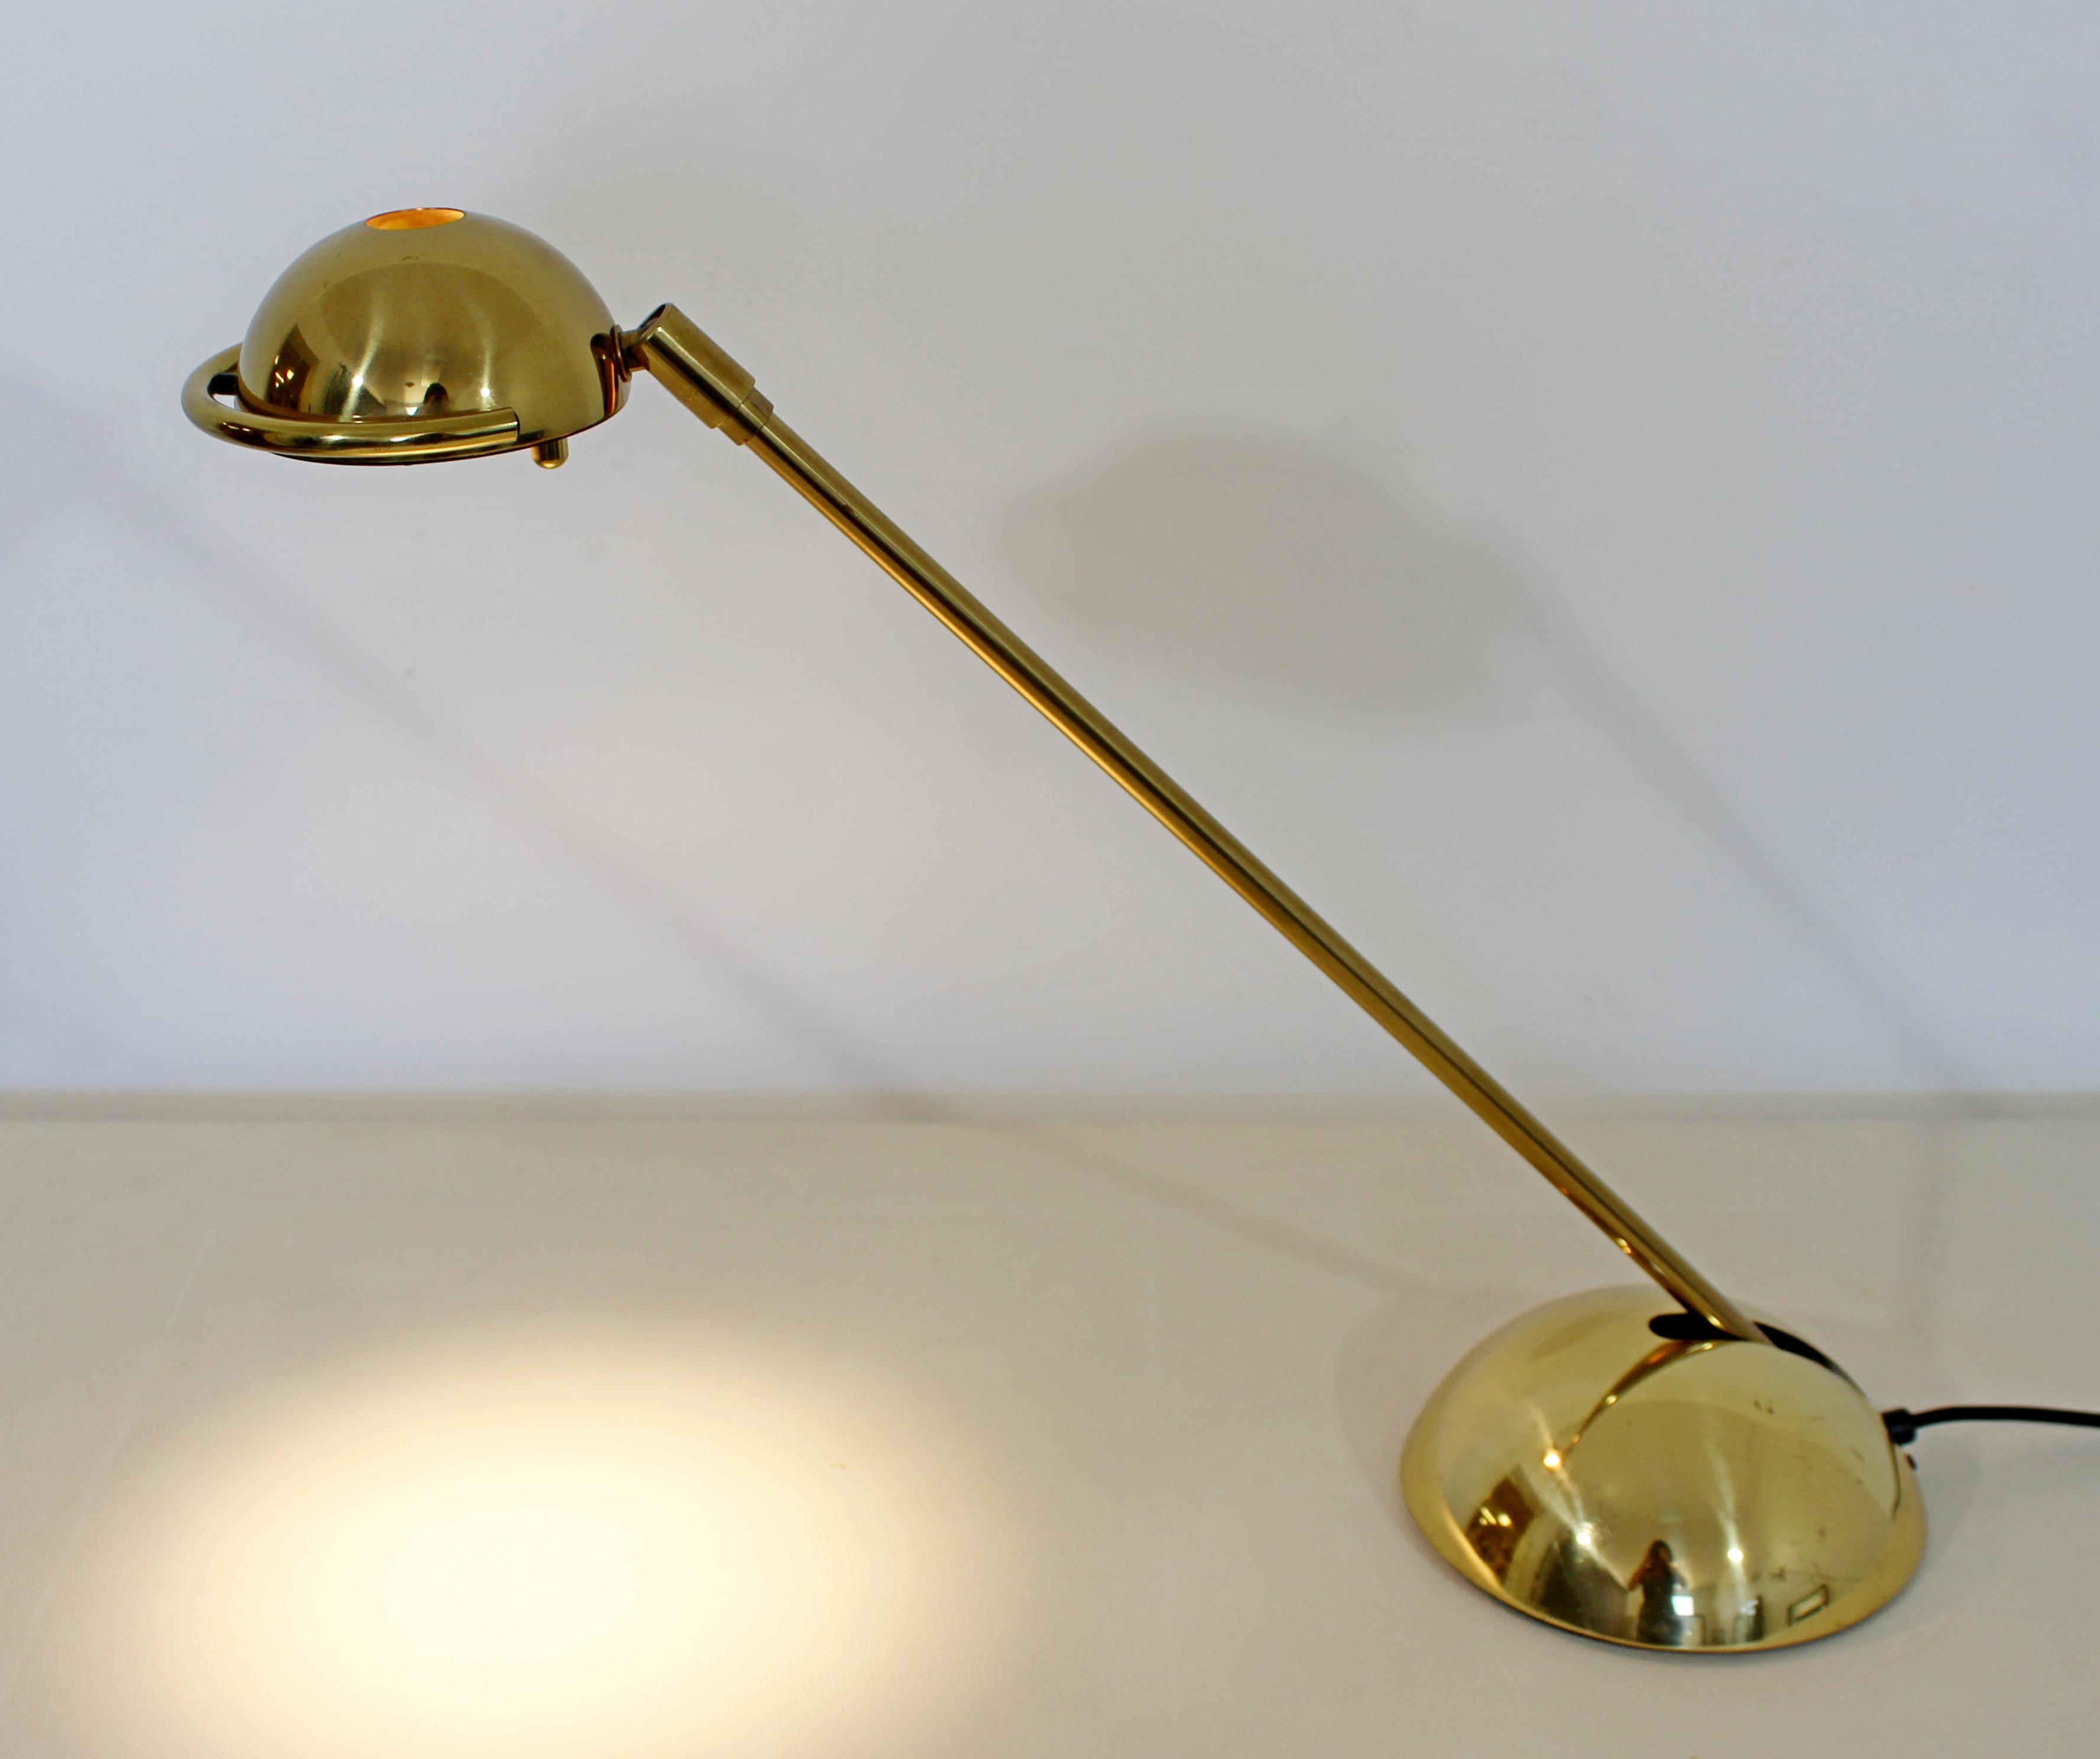 For your consideration is a gorgeous, adjustable brass reading table lamp, inscribed Koch & Lowy, circa 1970s. In very good vintage condition, with a patina to match its age. The dimensions are 7